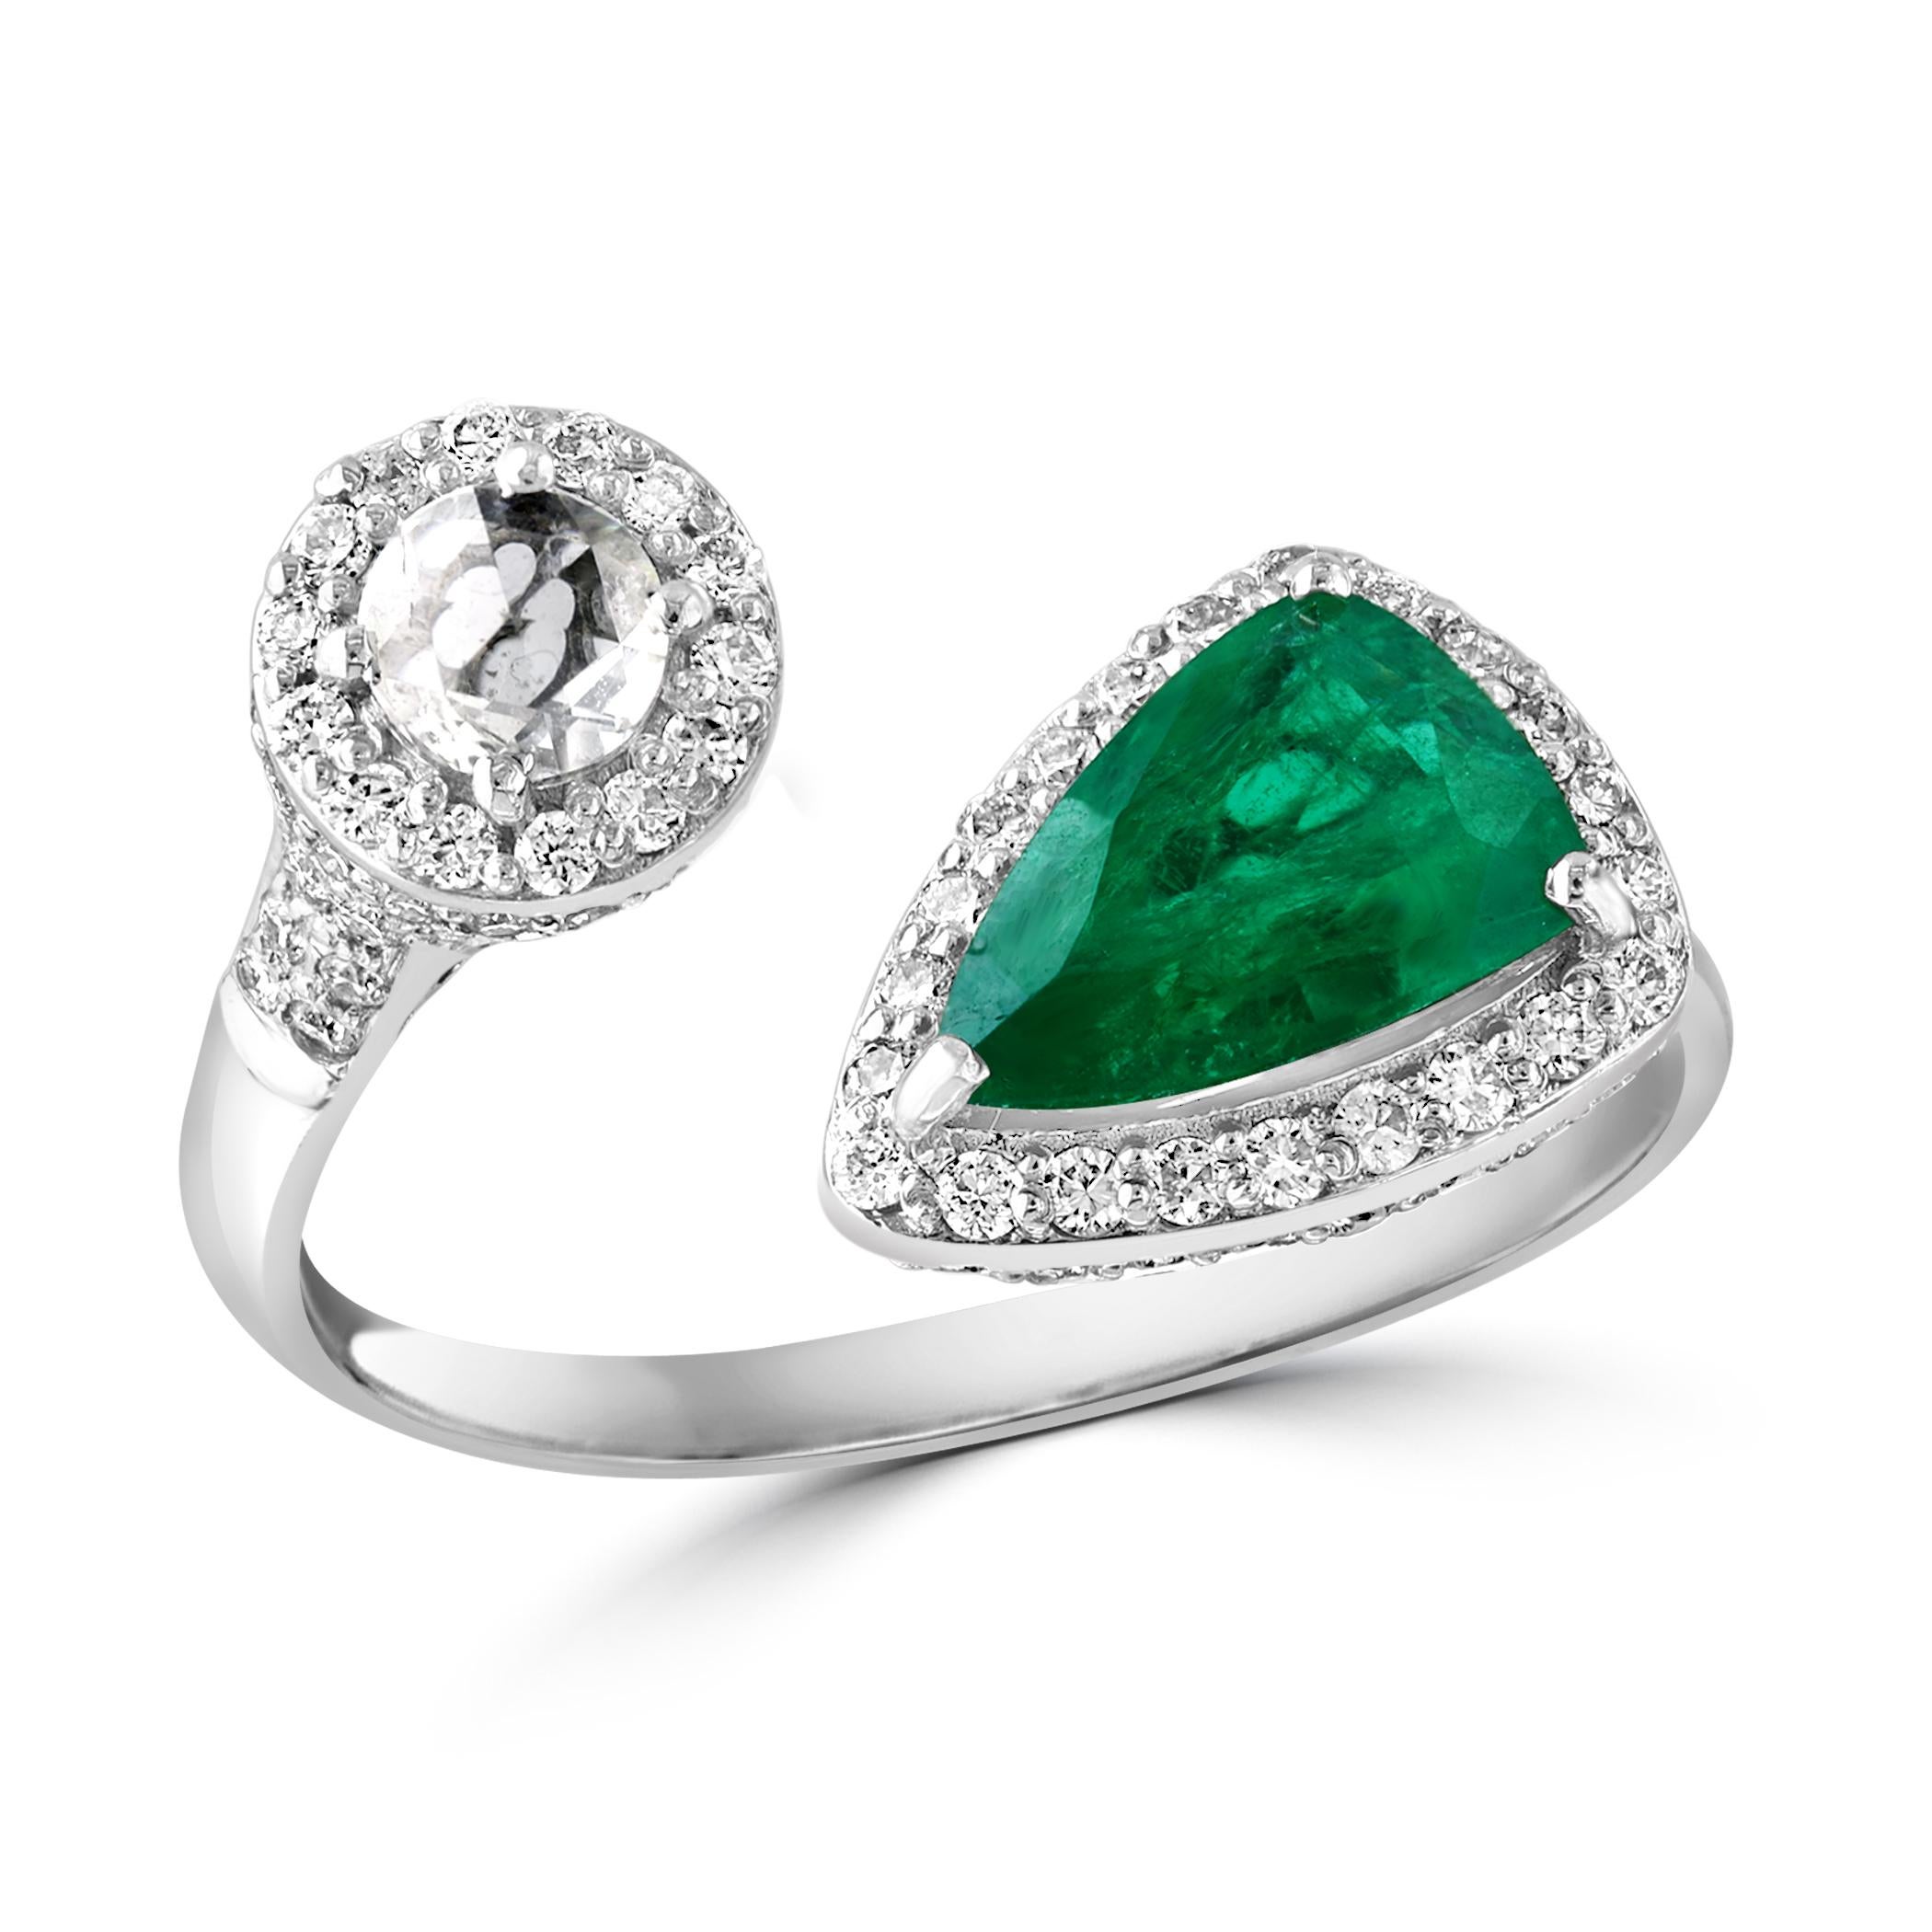 Pear Cut 1.5 Ct Finest Colombian Pear Emerald & 1 Ct Diamond Ring in 18 Kt Gold Size 8 For Sale